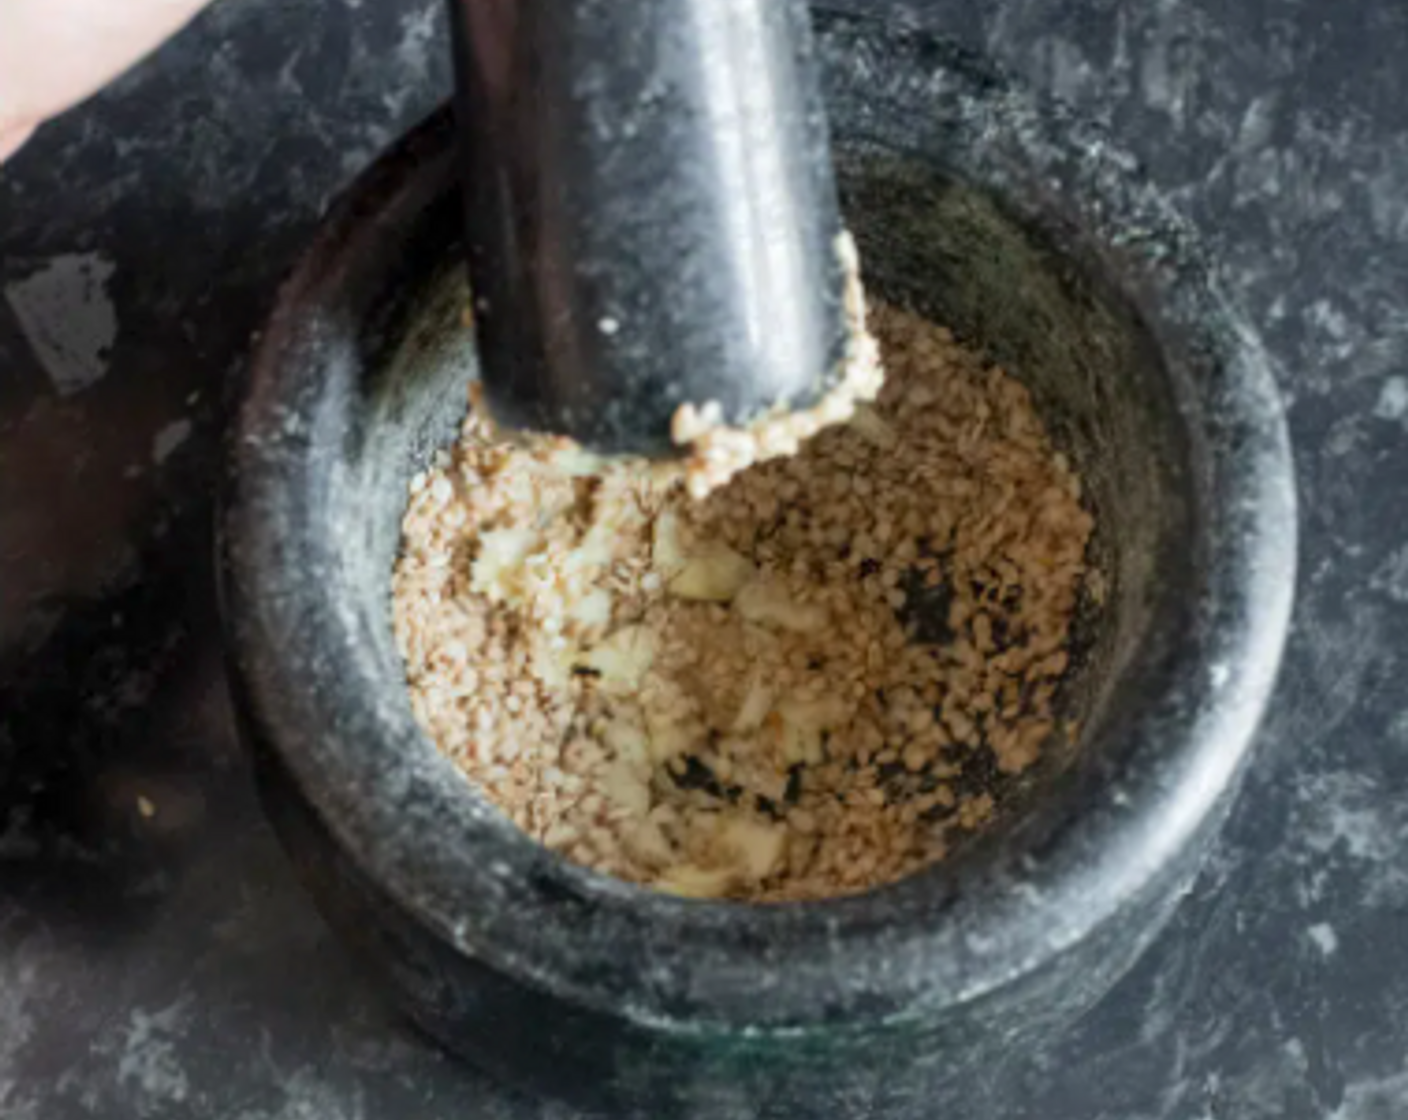 step 1 Lightly crush the White Sesame Seeds (2 Tbsp) with a pestle for 1-2 minutes. Add the Garlic (1 clove) and grind for another 1-2 minutes. The texture should be a combination of powder and fine pieces, not a paste.